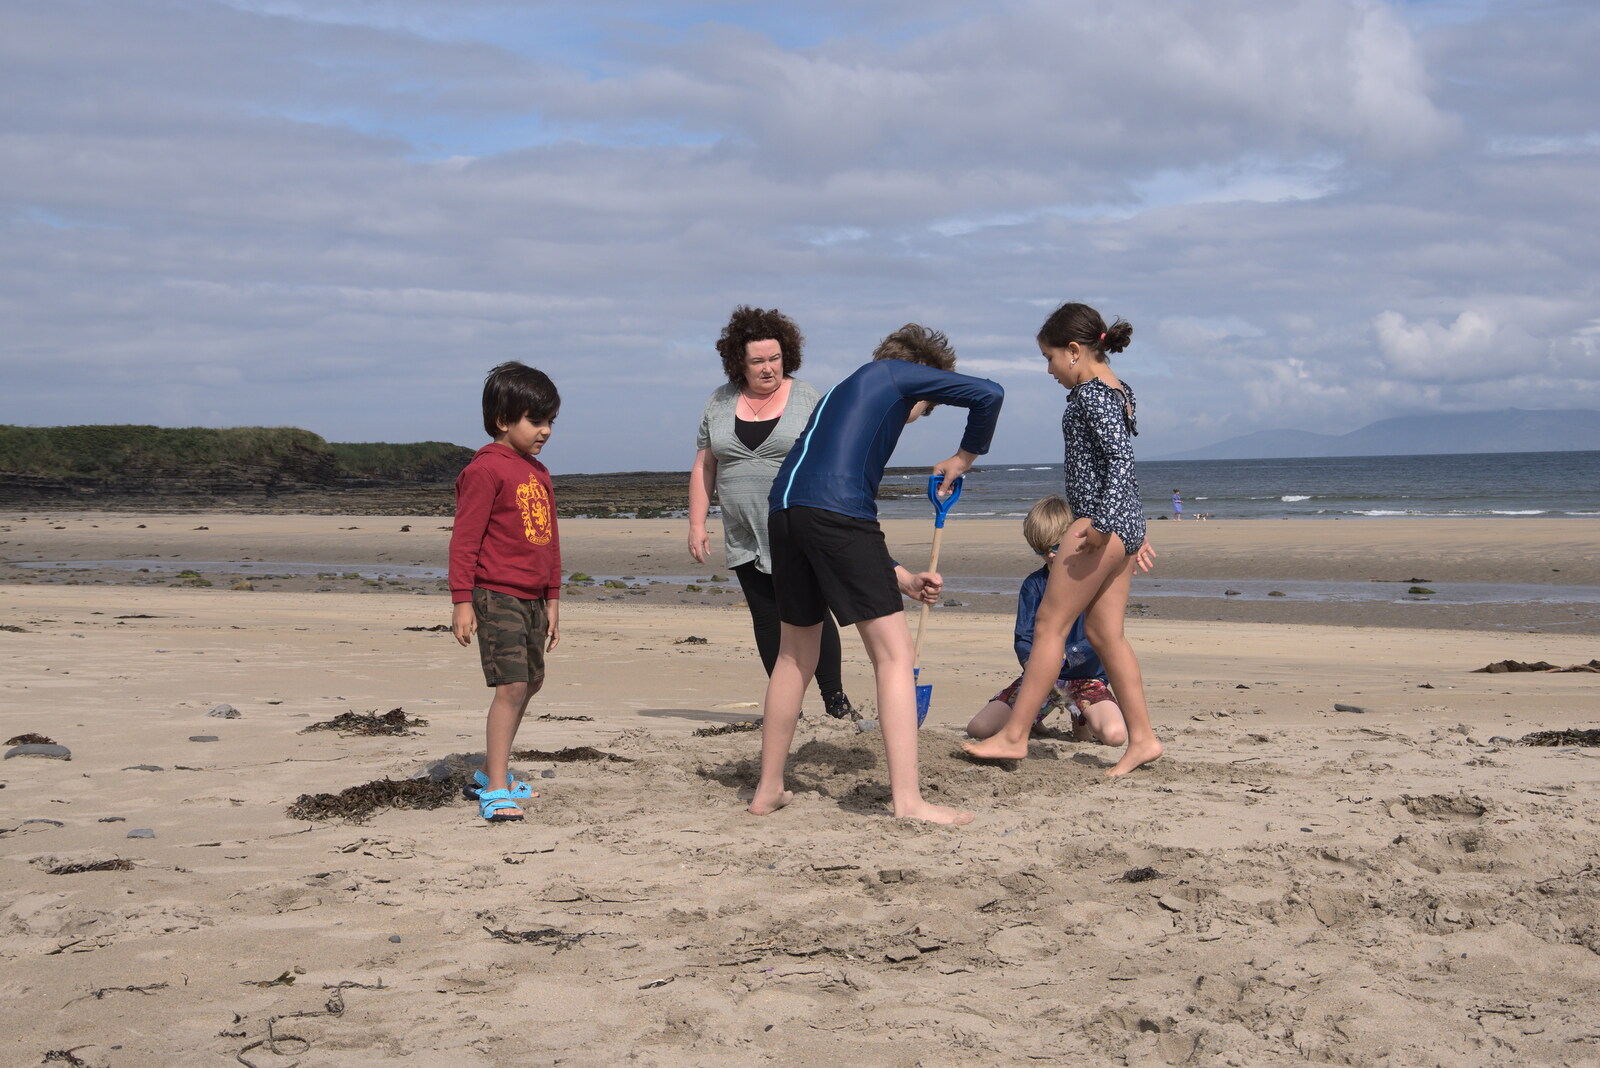 Pints of Guinness and Streedagh Beach, Grange and Sligo, Ireland - 9th August 2021: Nicolas and Annalua have joined in